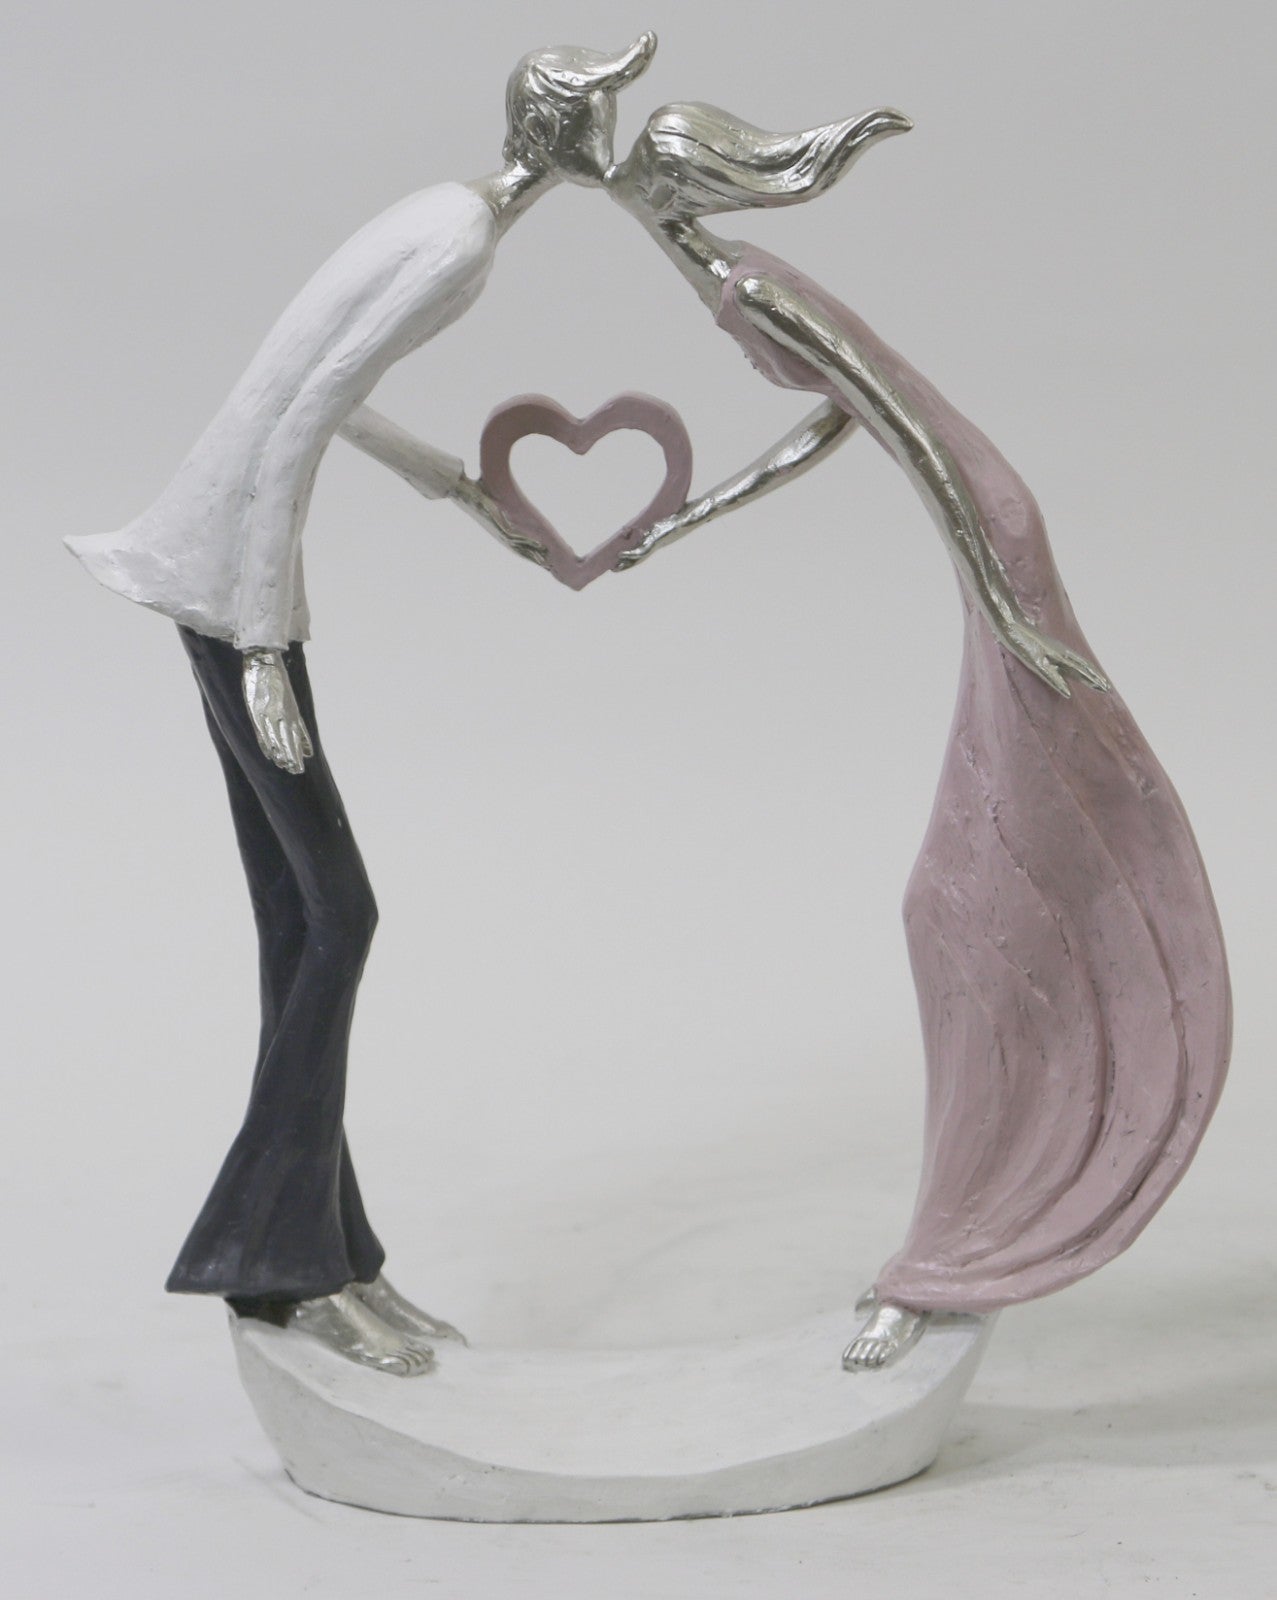 LOVERS KISSING Sculpture Young Male & Female Erotic Statue Silver Finish Sale